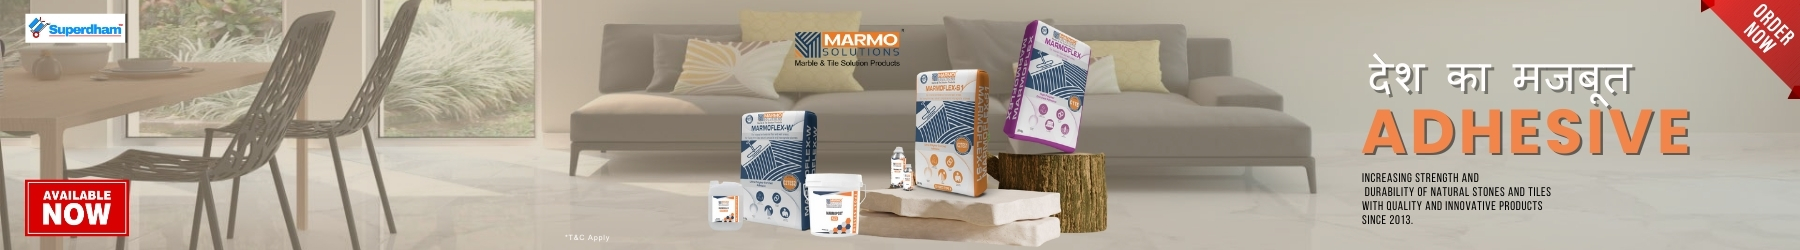 #MarmoSolutions Products at attractive prices available at #Superdham